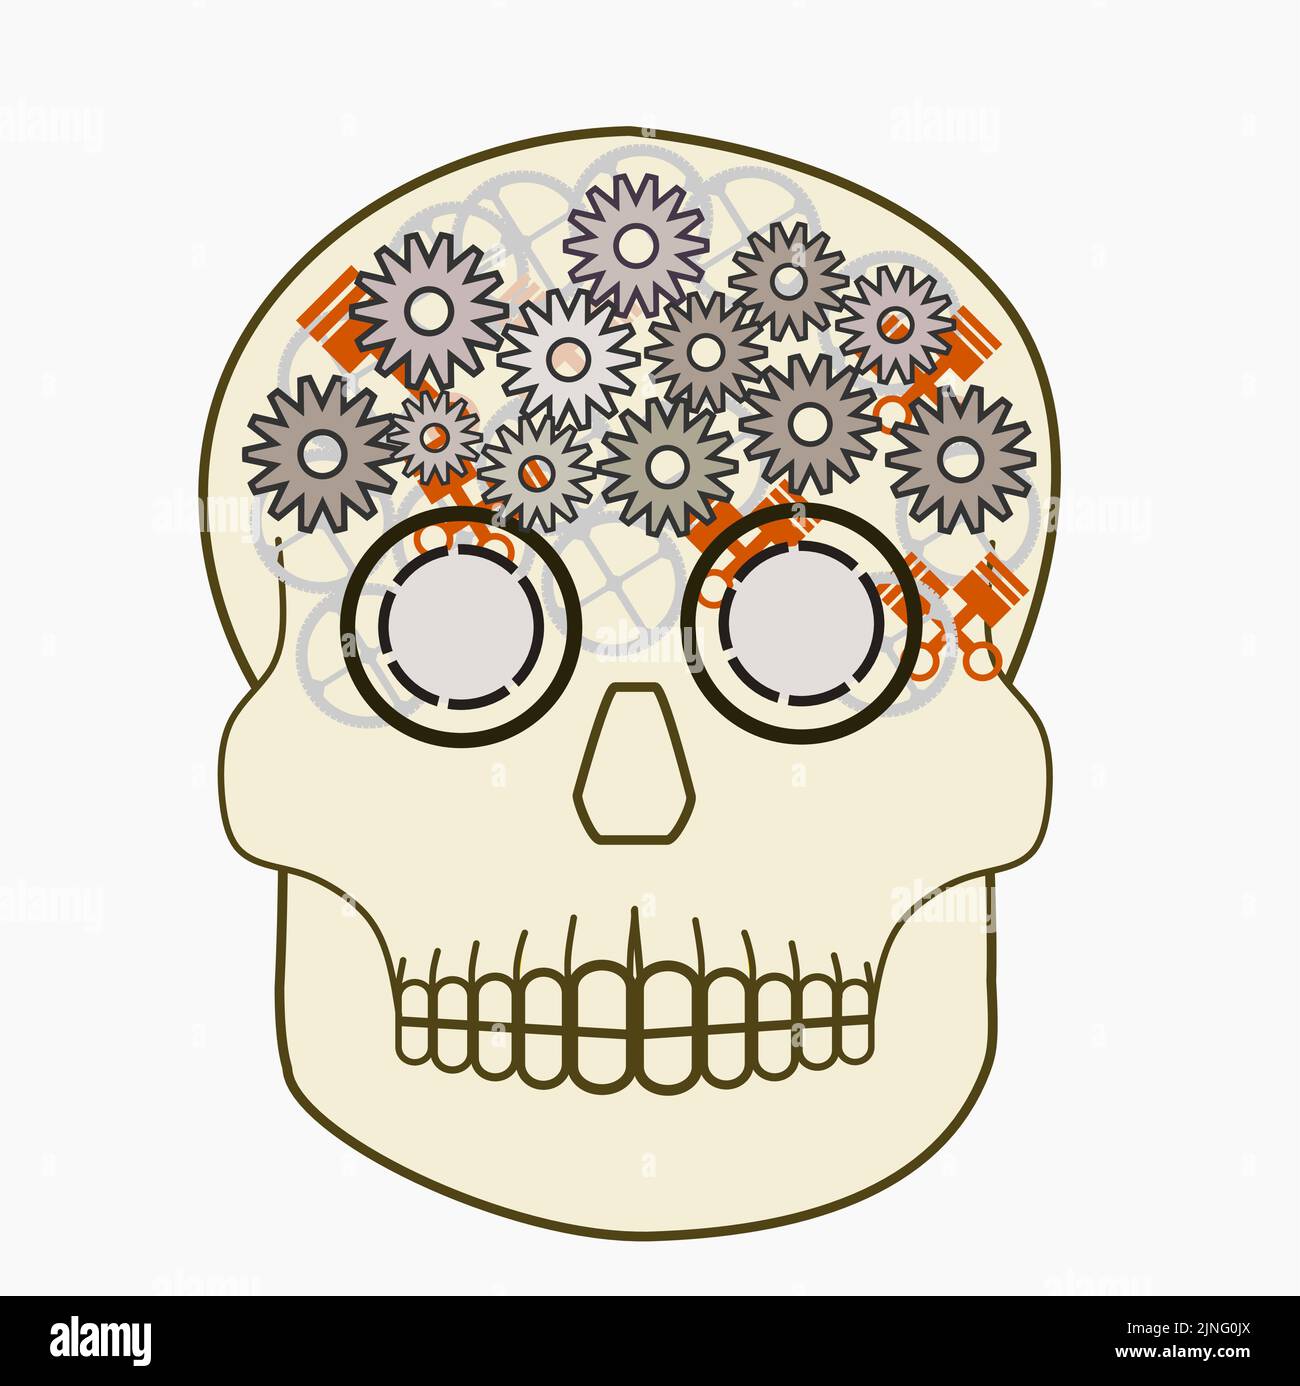 Human skull with gears inside Stock Vector